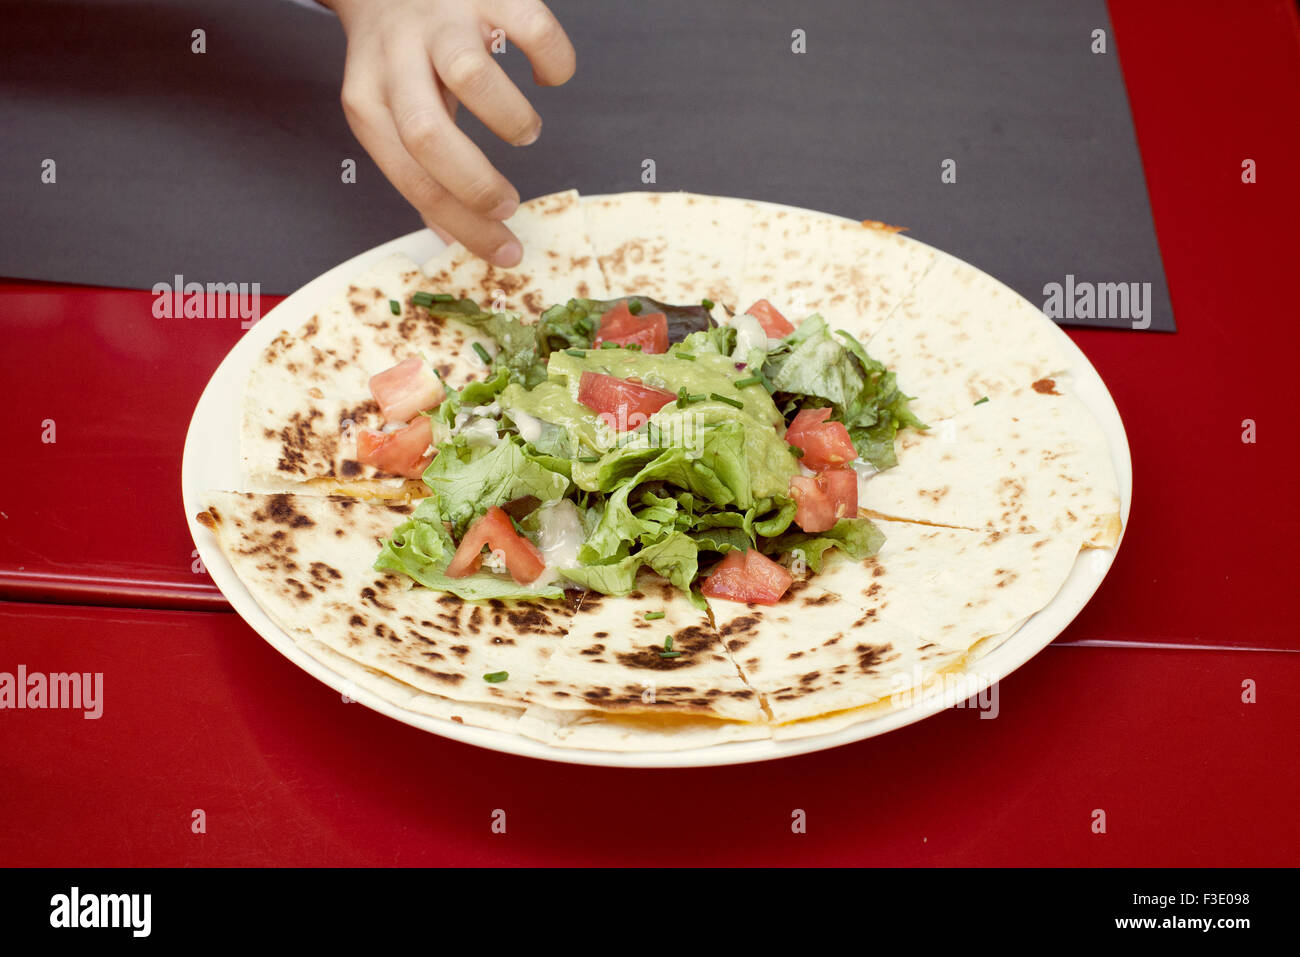 Child's hand reaching for quesadilla on plate Stock Photo